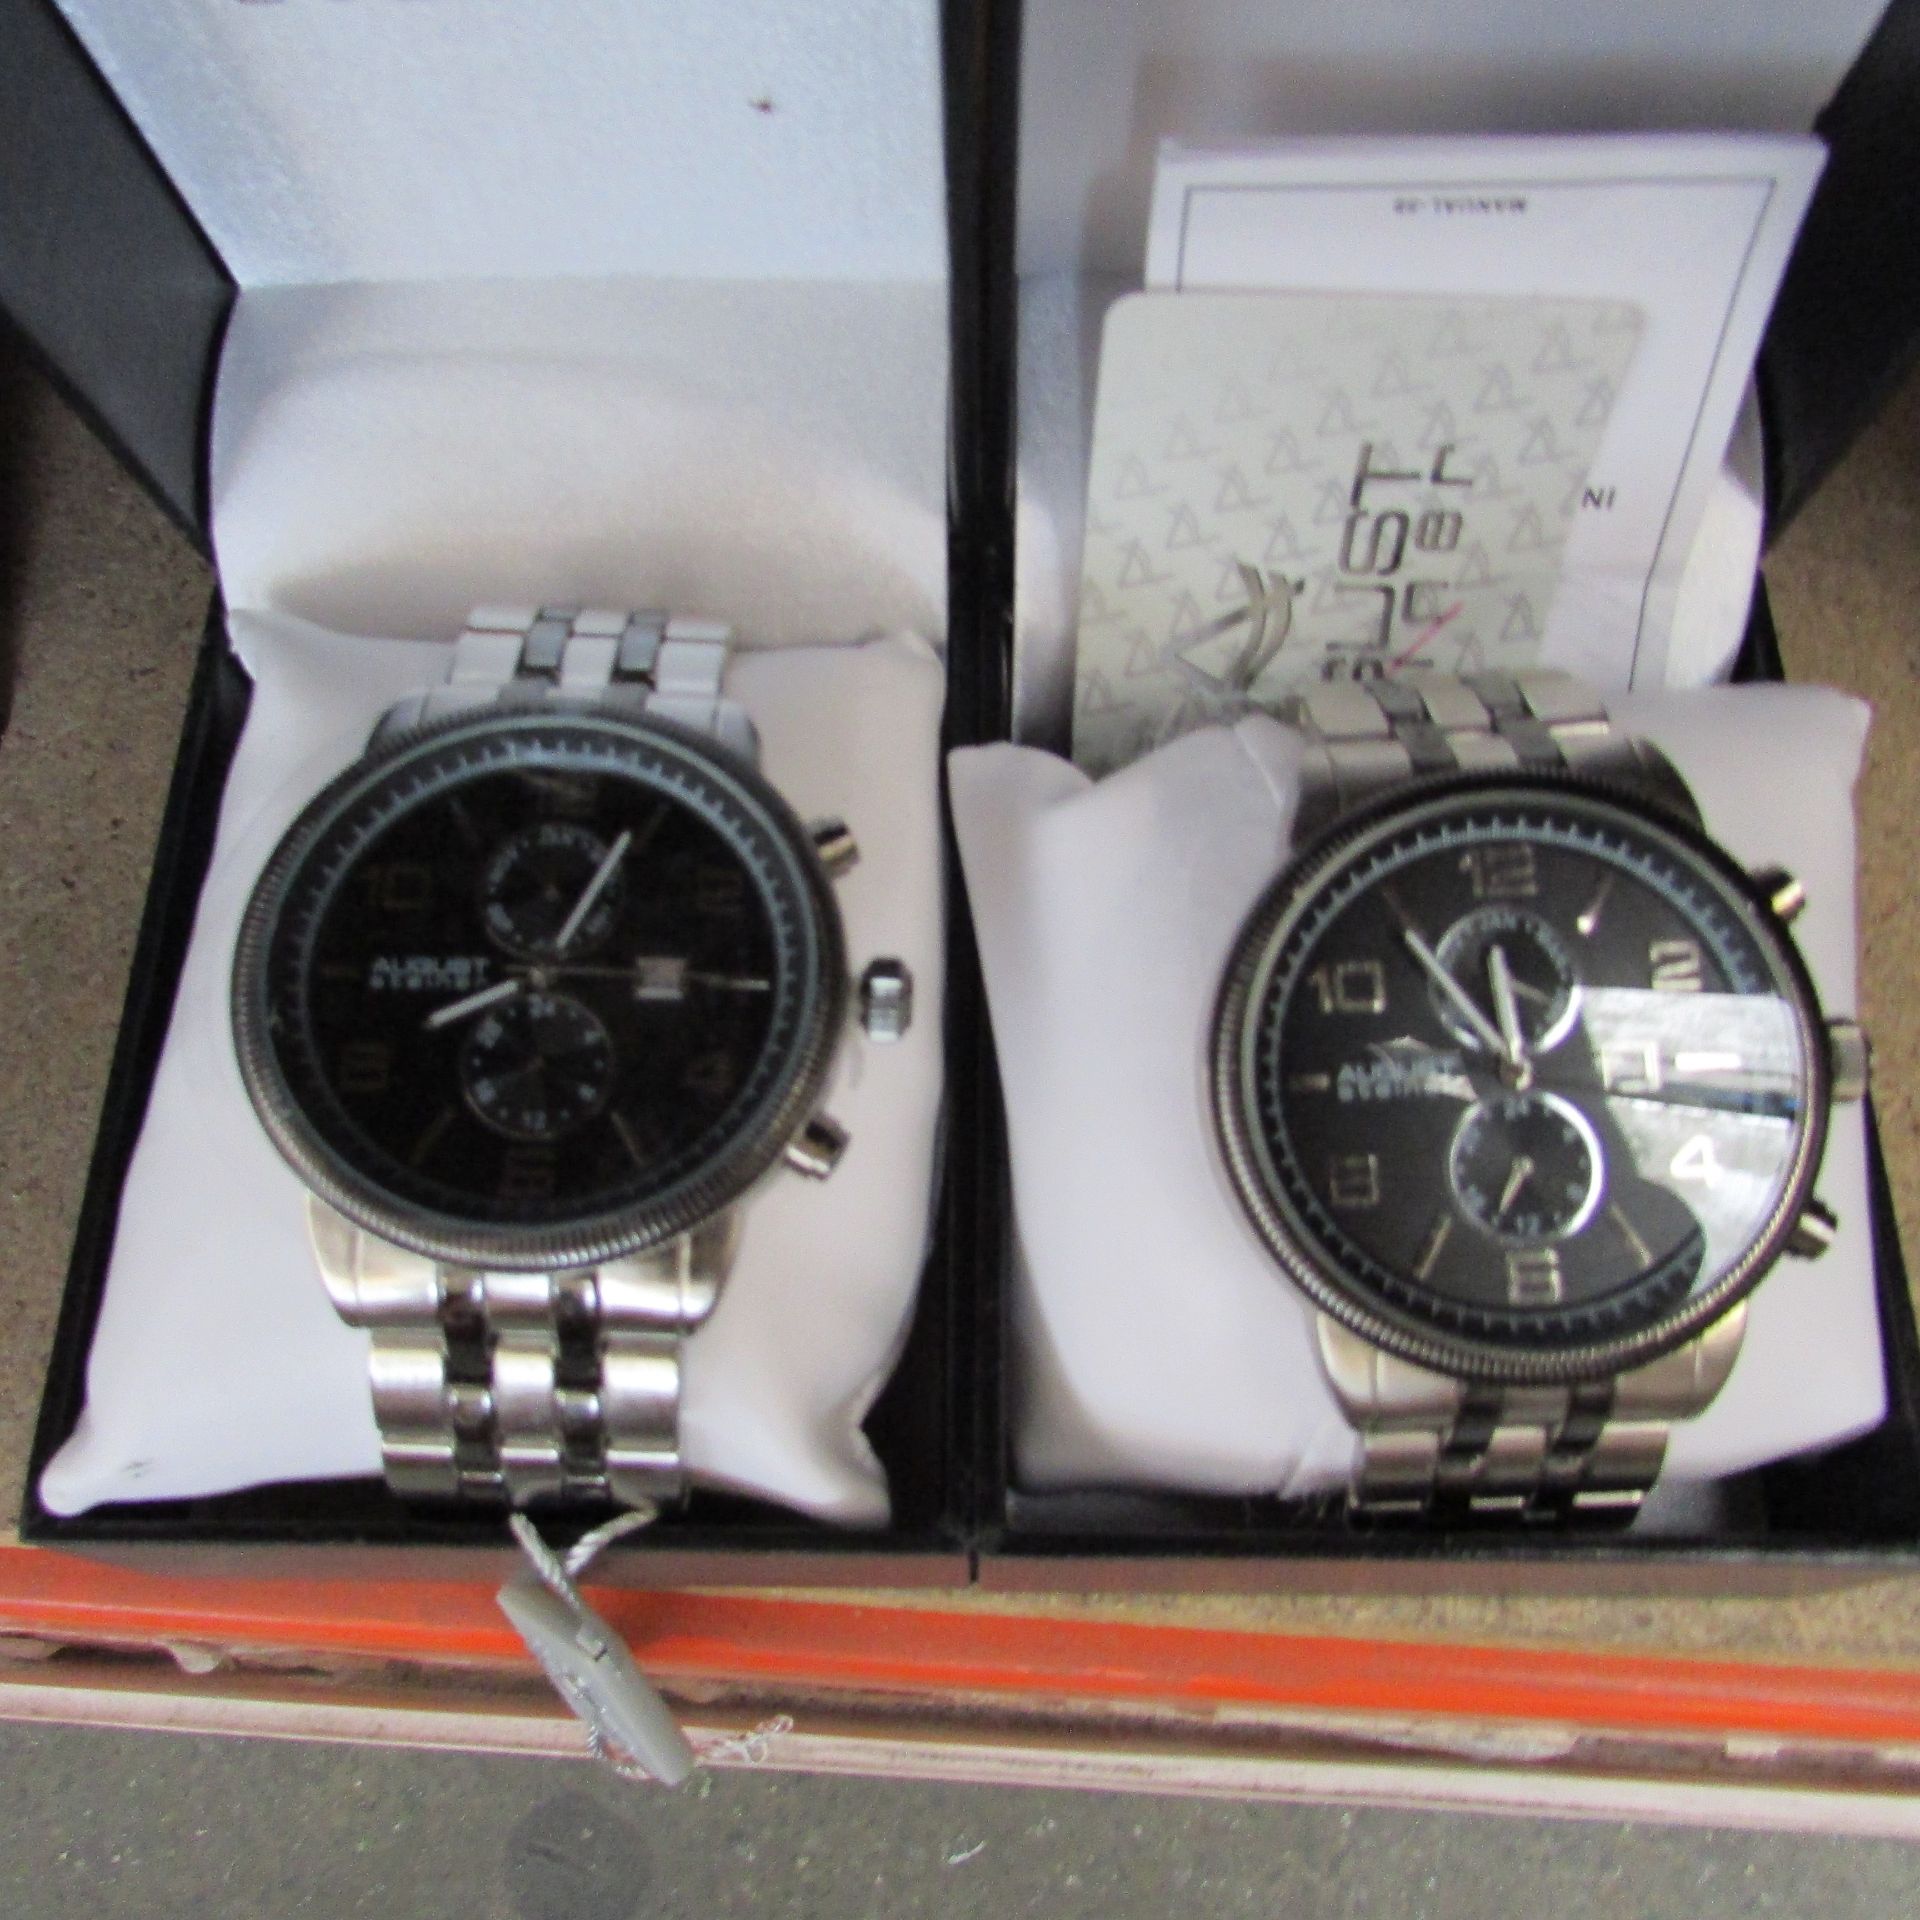 2X AUGUST STEINER MENS WATCHES STAINLESS STEEL MODEL NUMBER AS8069